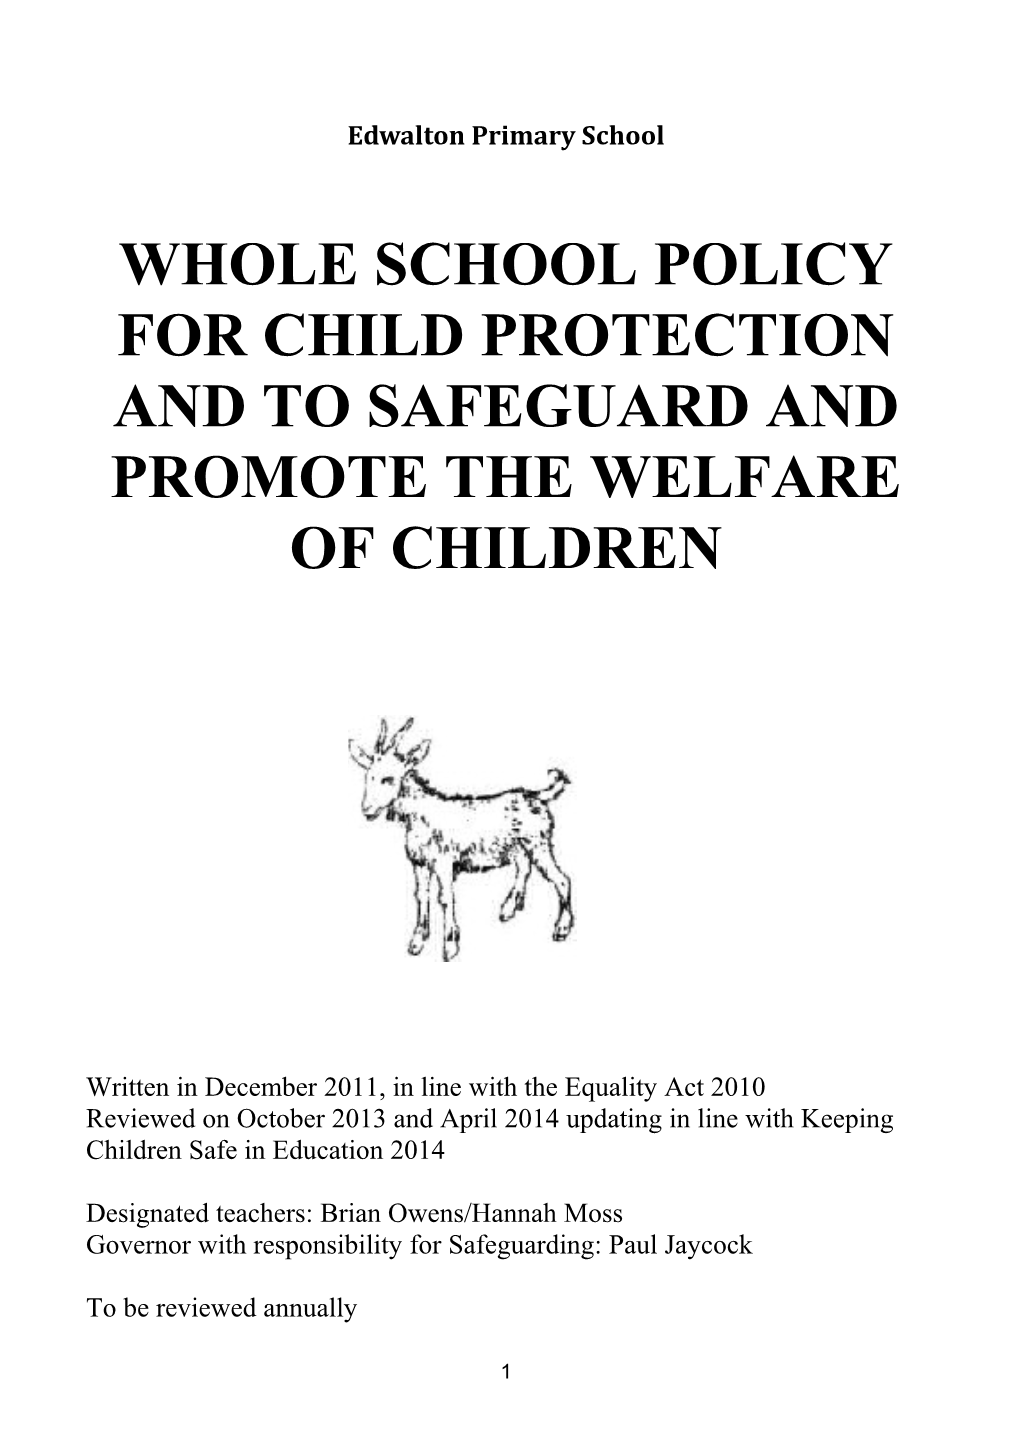 Whole School Policy on Child Protection